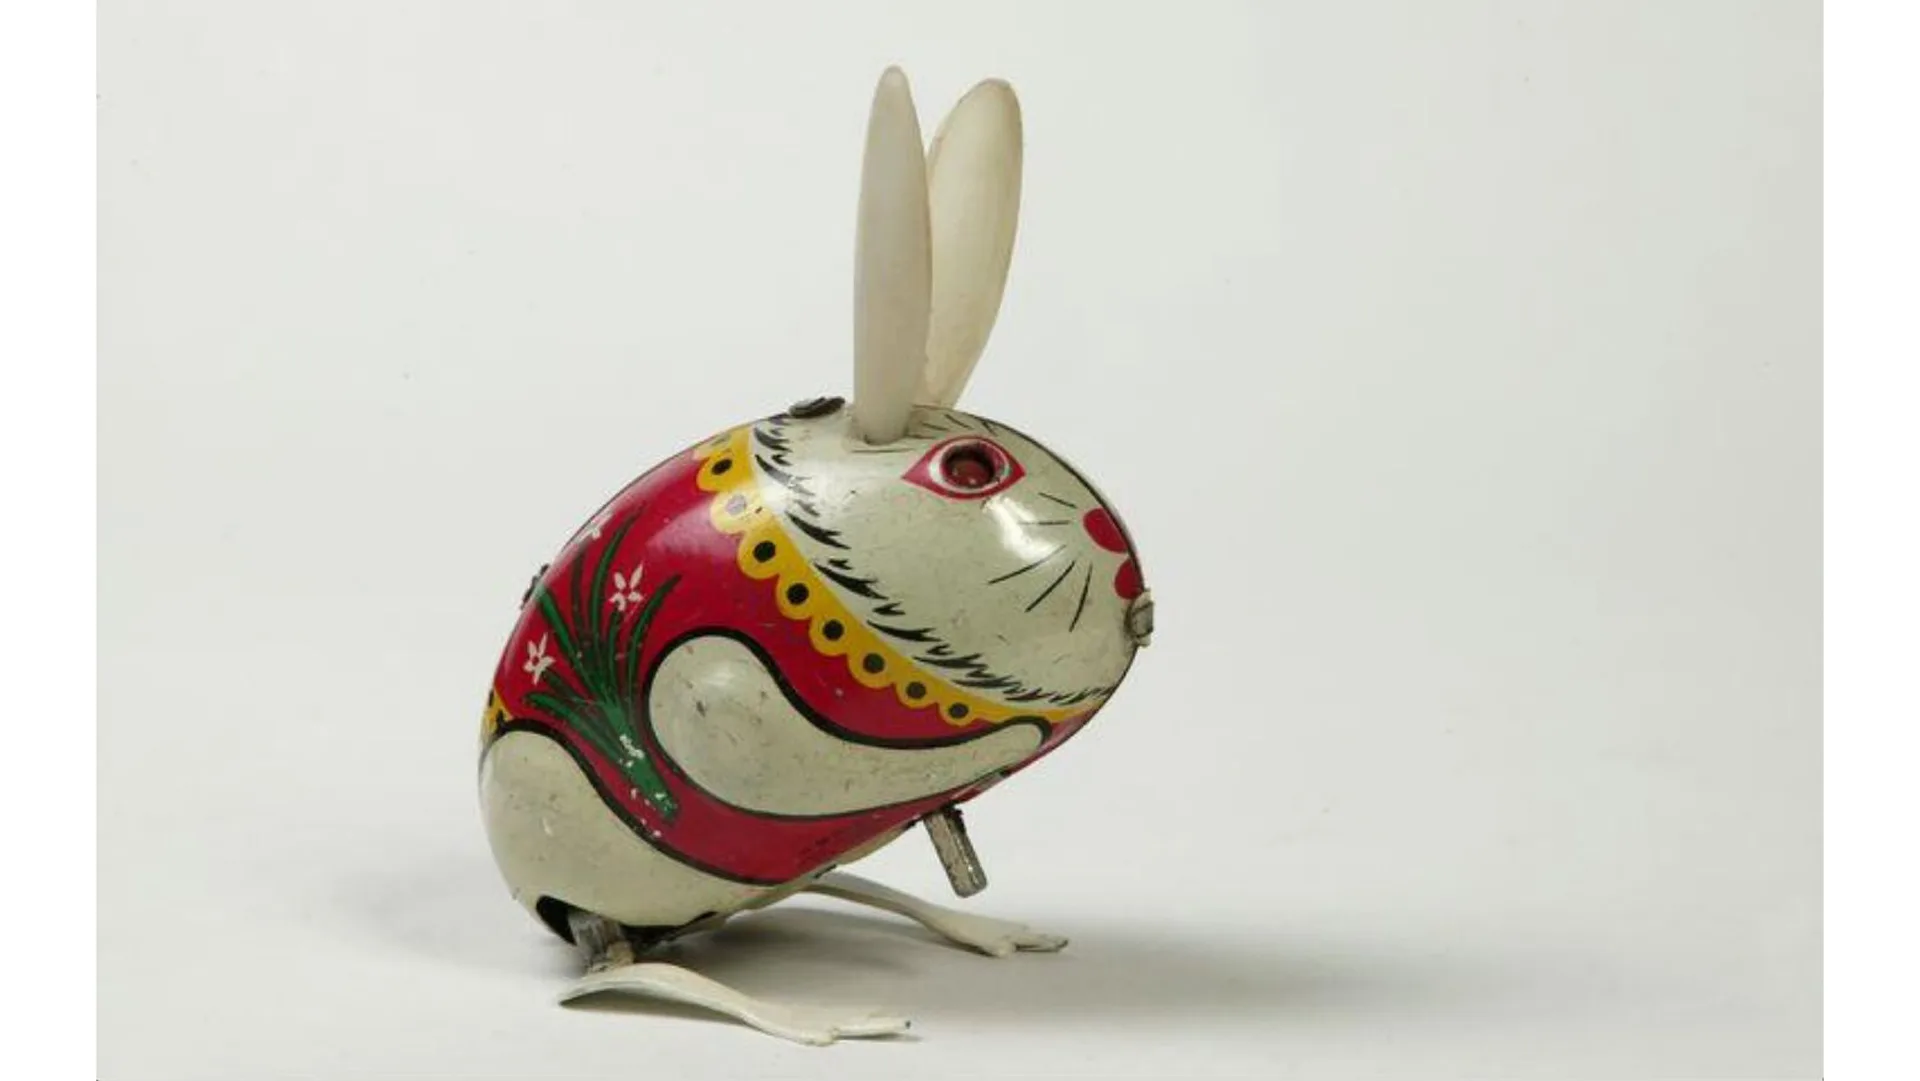 A photograph of a tin plate clockwork toy of a rabbit with a colourful jacket and painted red and black eyes, holding it's paw up to it's chin, against a white and grey background.